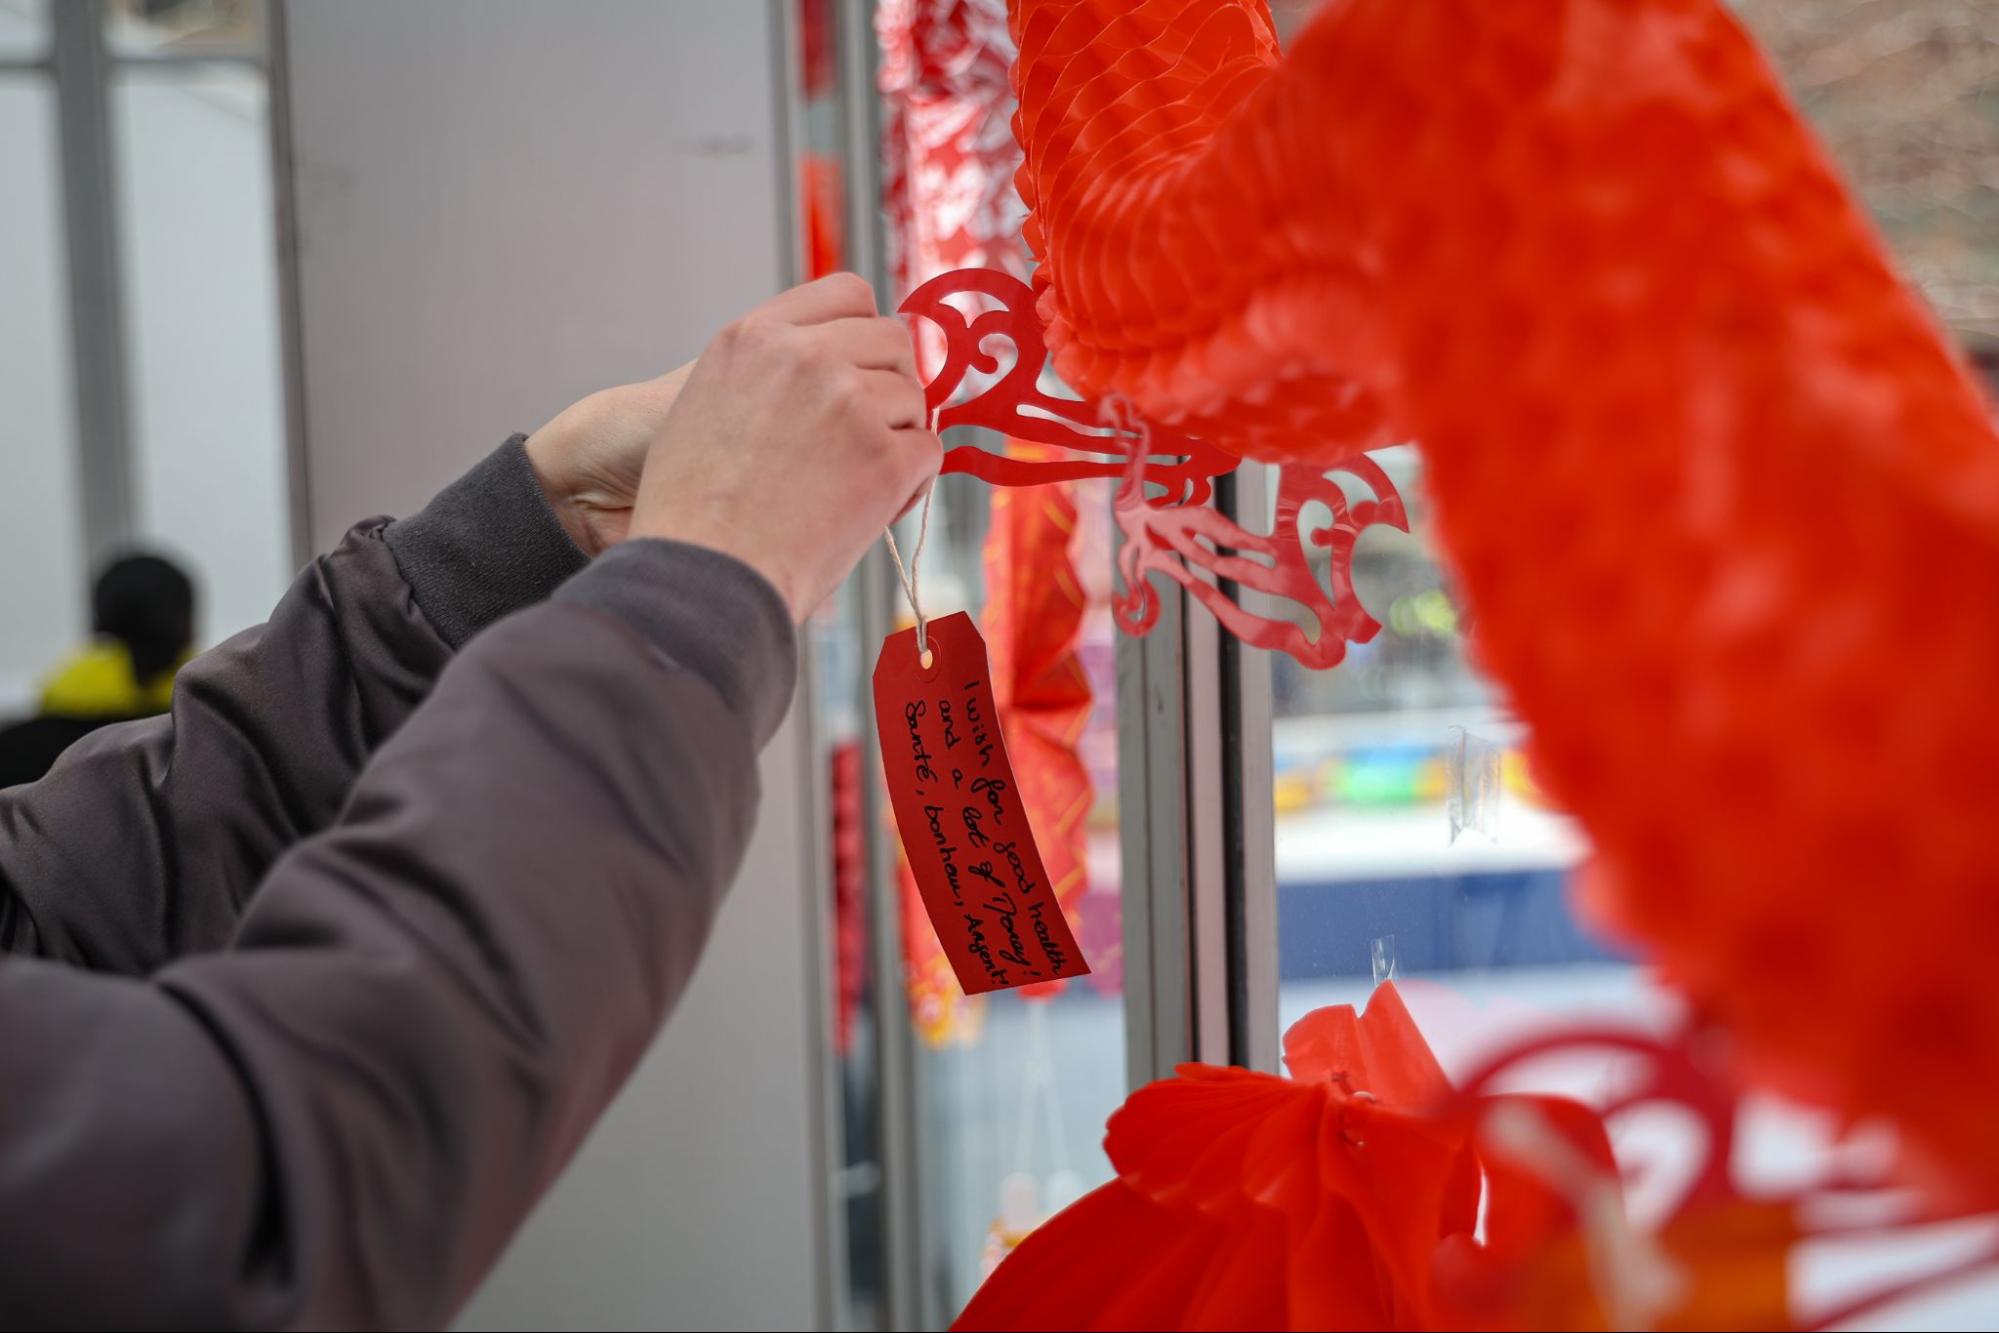 A person ties a red tag with a wish for the New Year onto a window with red decoration.